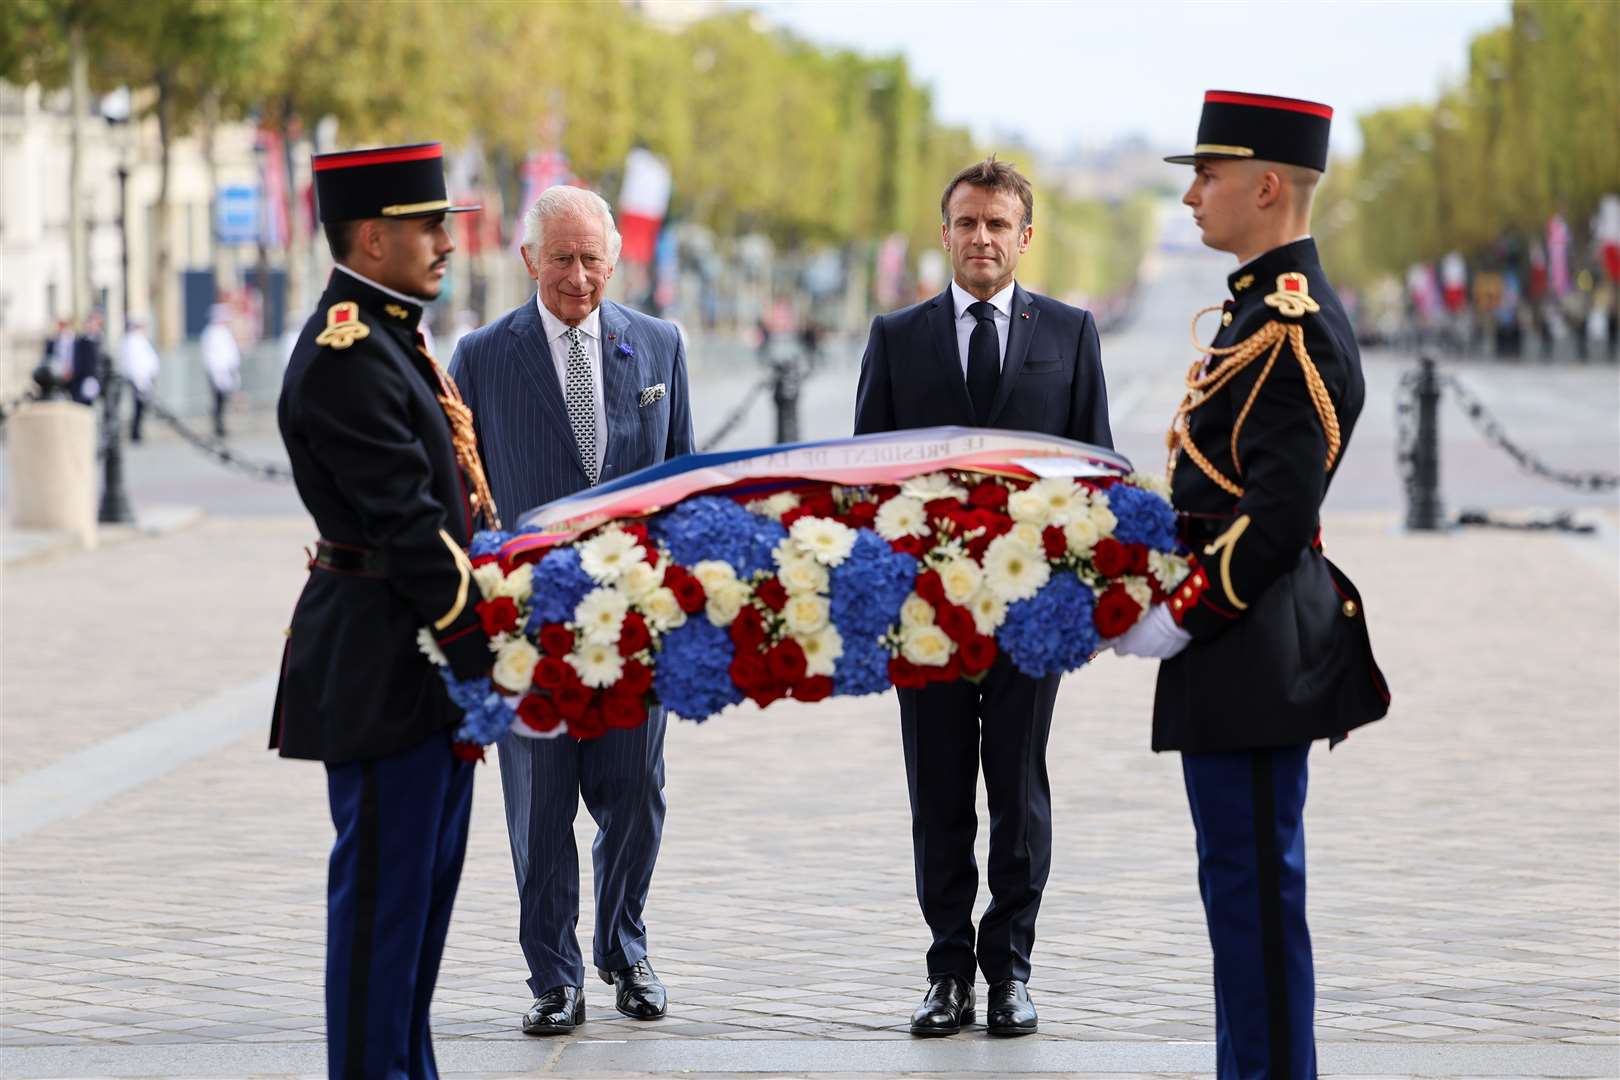 The King and president stand in front of the Tomb of the Unknown Soldier during a ceremonial welcome at the Arc de Triomphe (Chris Jackson/PA)